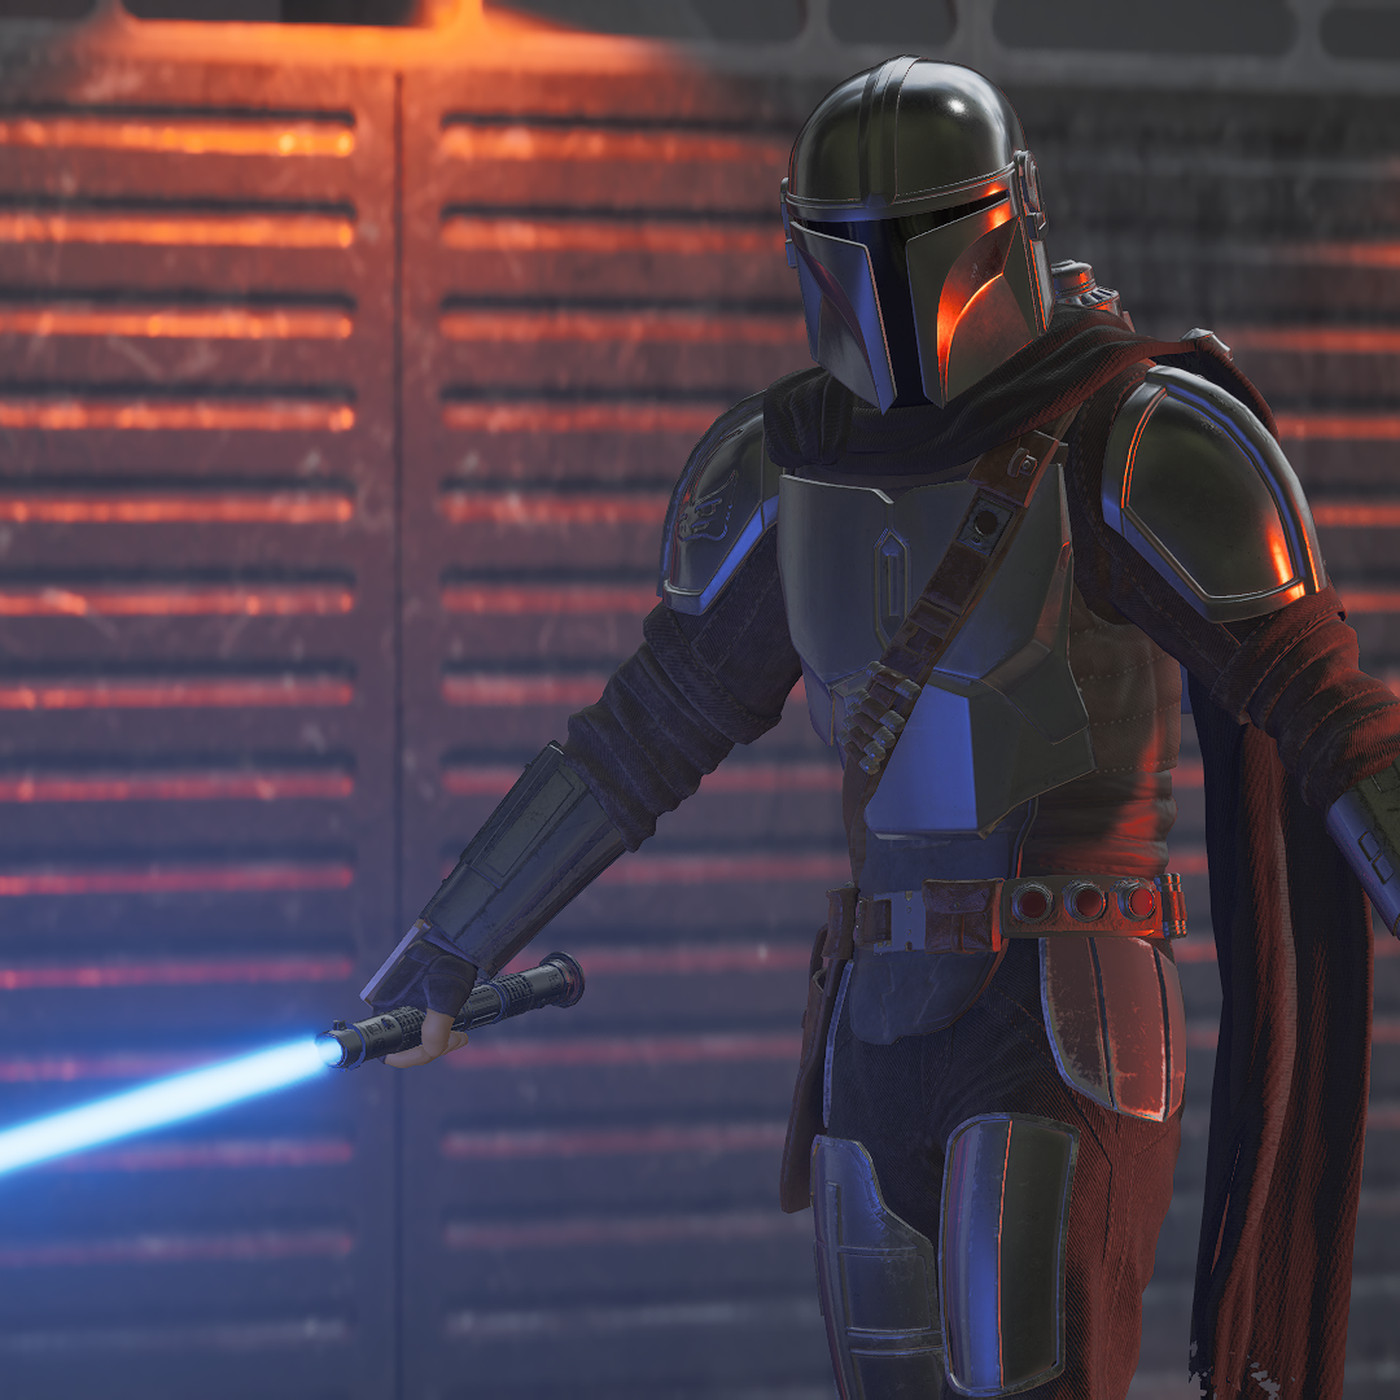 Can I play as a Mandalorian bounty hunter in any Star Wars games?